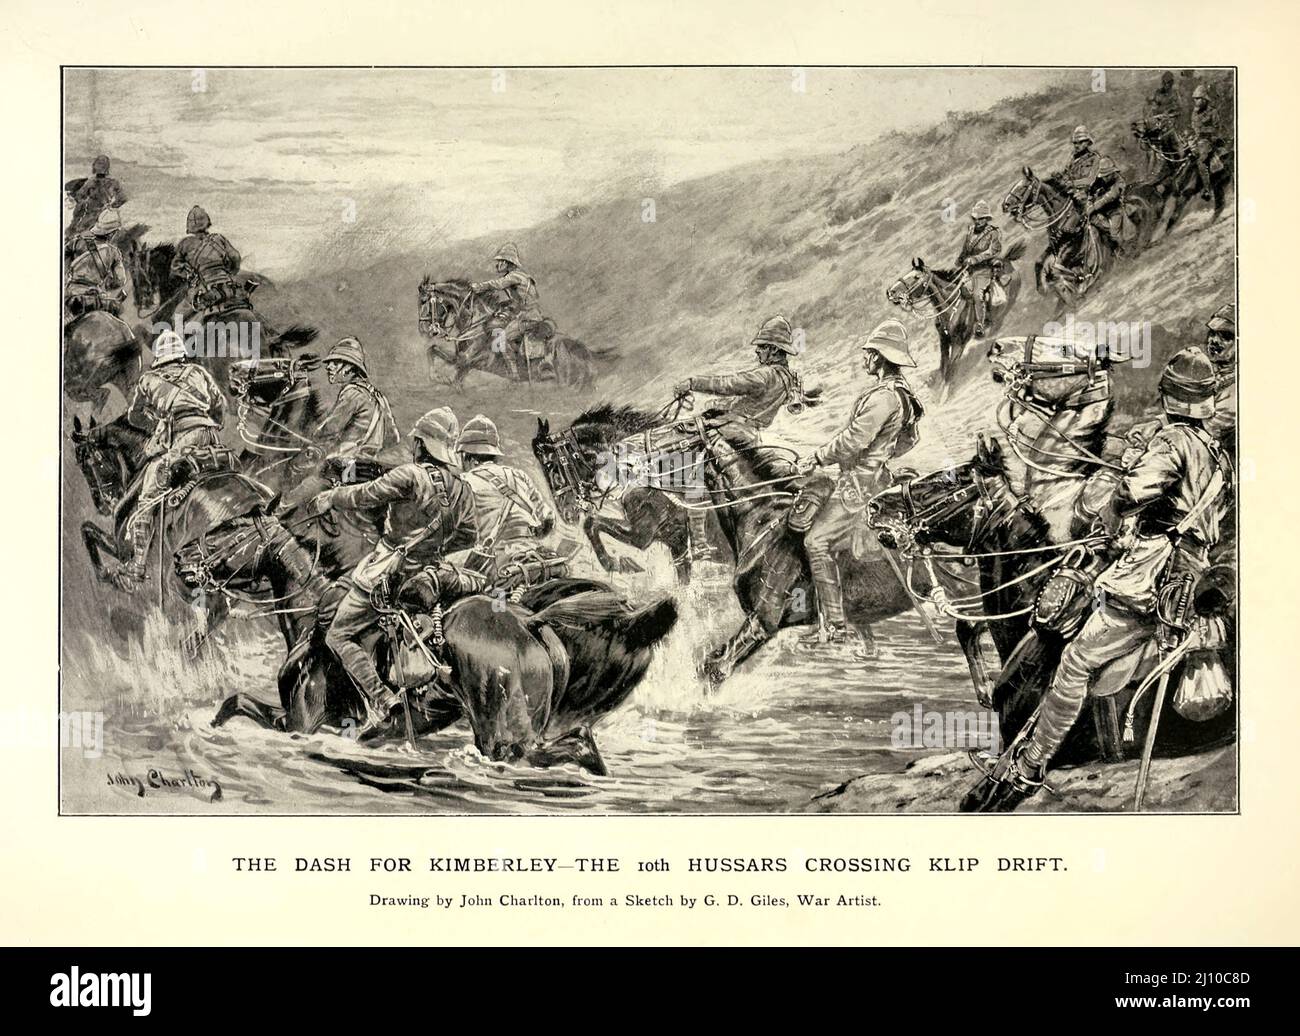 The Dash for Kimberley The 10th Hussars Crossing Klip Drift by John Charlton from the book ' South Africa and the Transvaal war ' by Louis Creswicke, Publisher; Edinburgh : T. C. & E. C. Jack 1900 Stock Photo